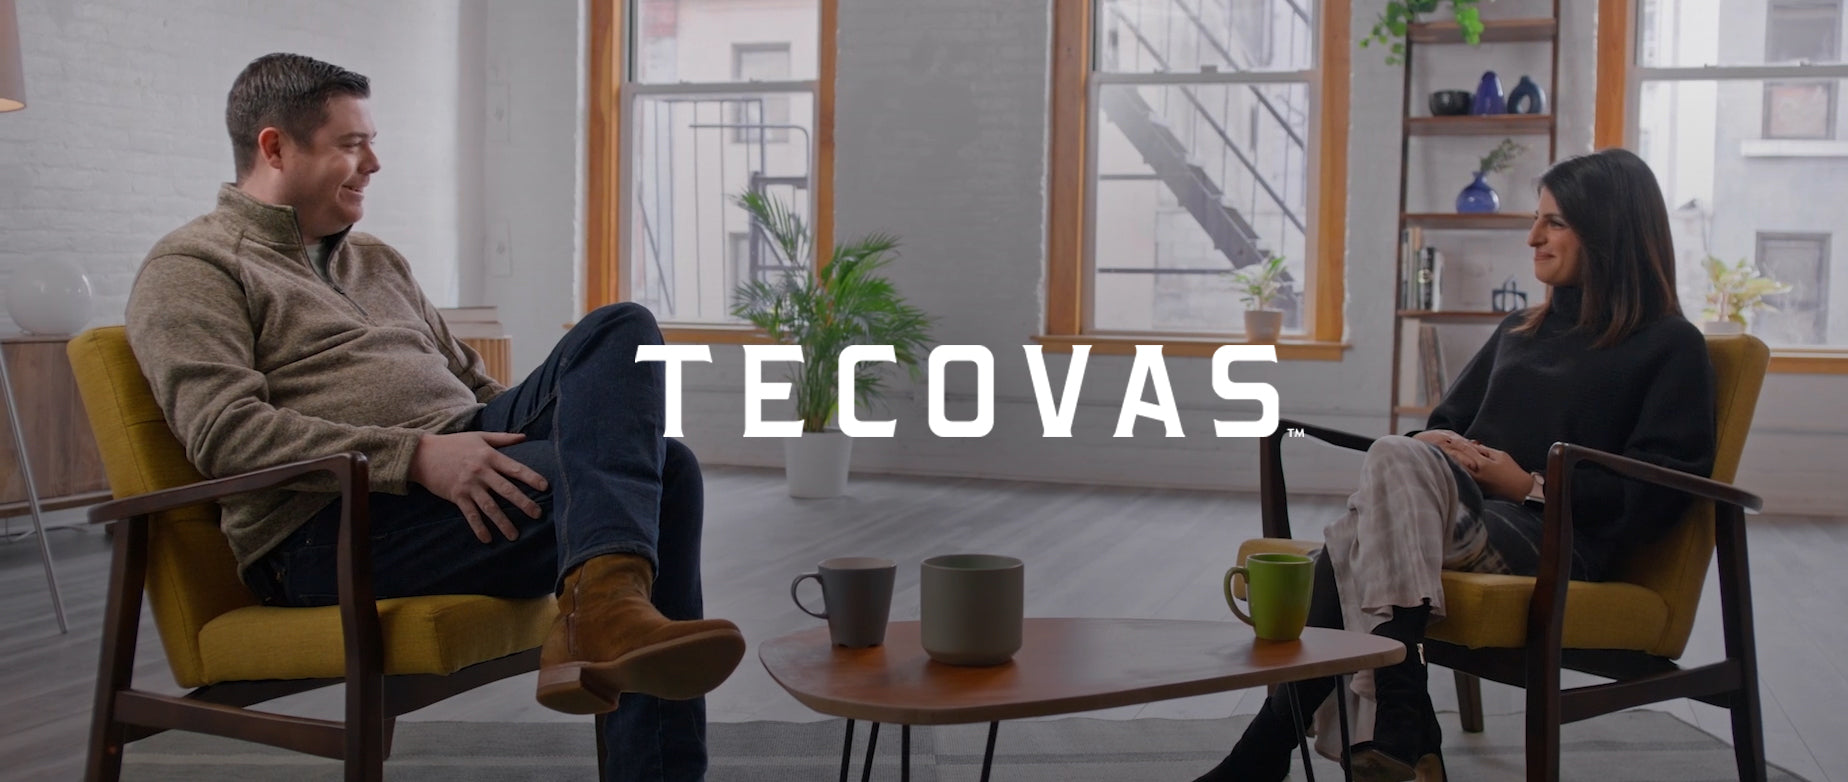 Image of a man sitting next to a woman being interviewed in the background with the logo of Tecovas over the image.